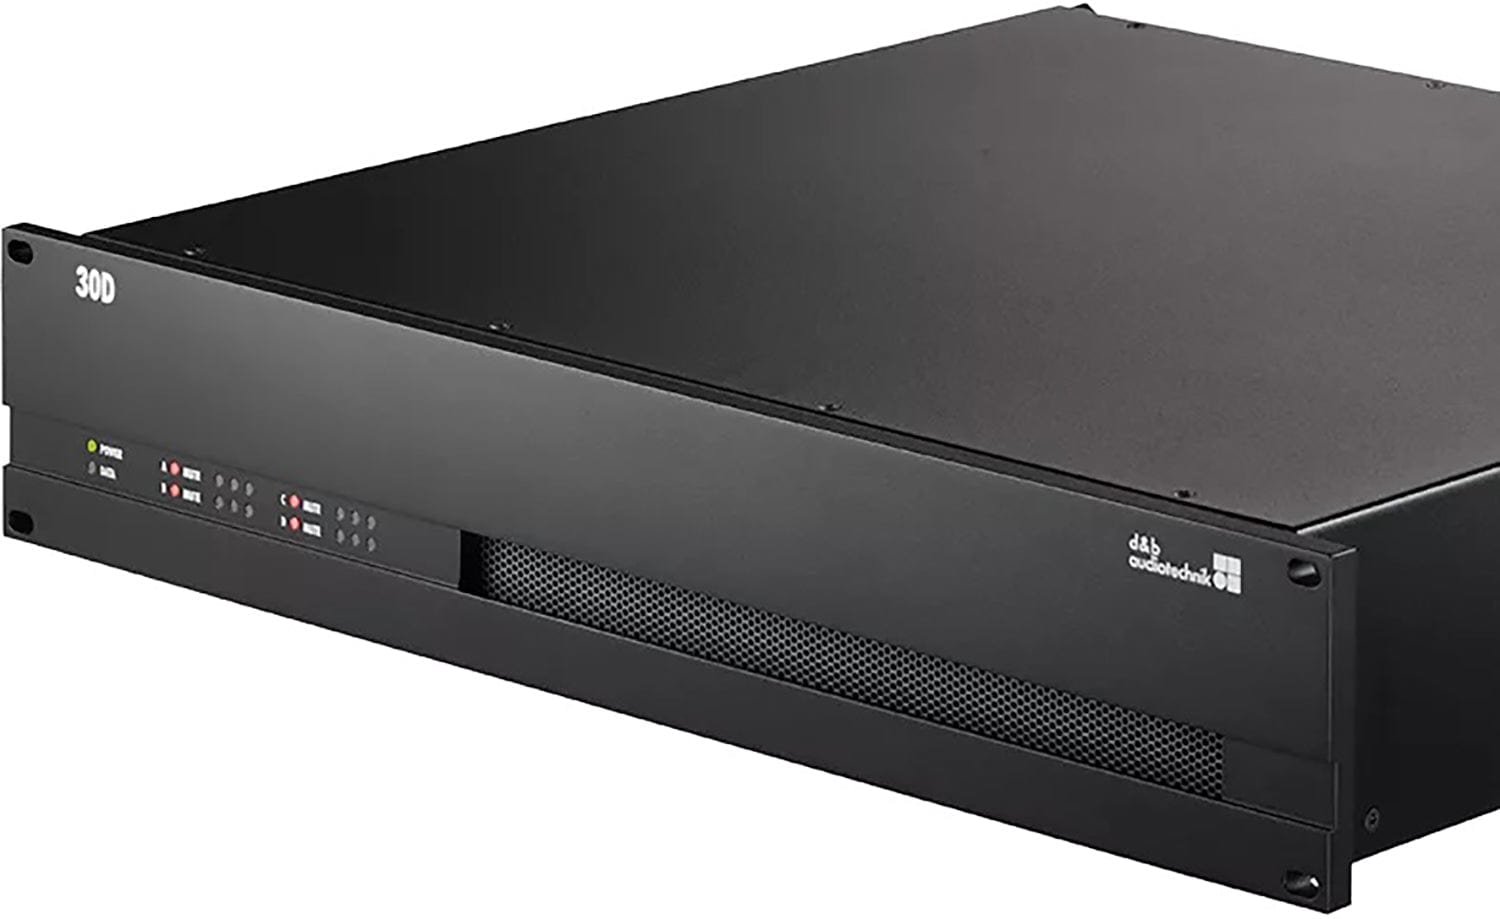 D&B Audiotechnik Z2770.500 30D Power Amplifier (US) for Installed Audio Systems - PSSL ProSound and Stage Lighting